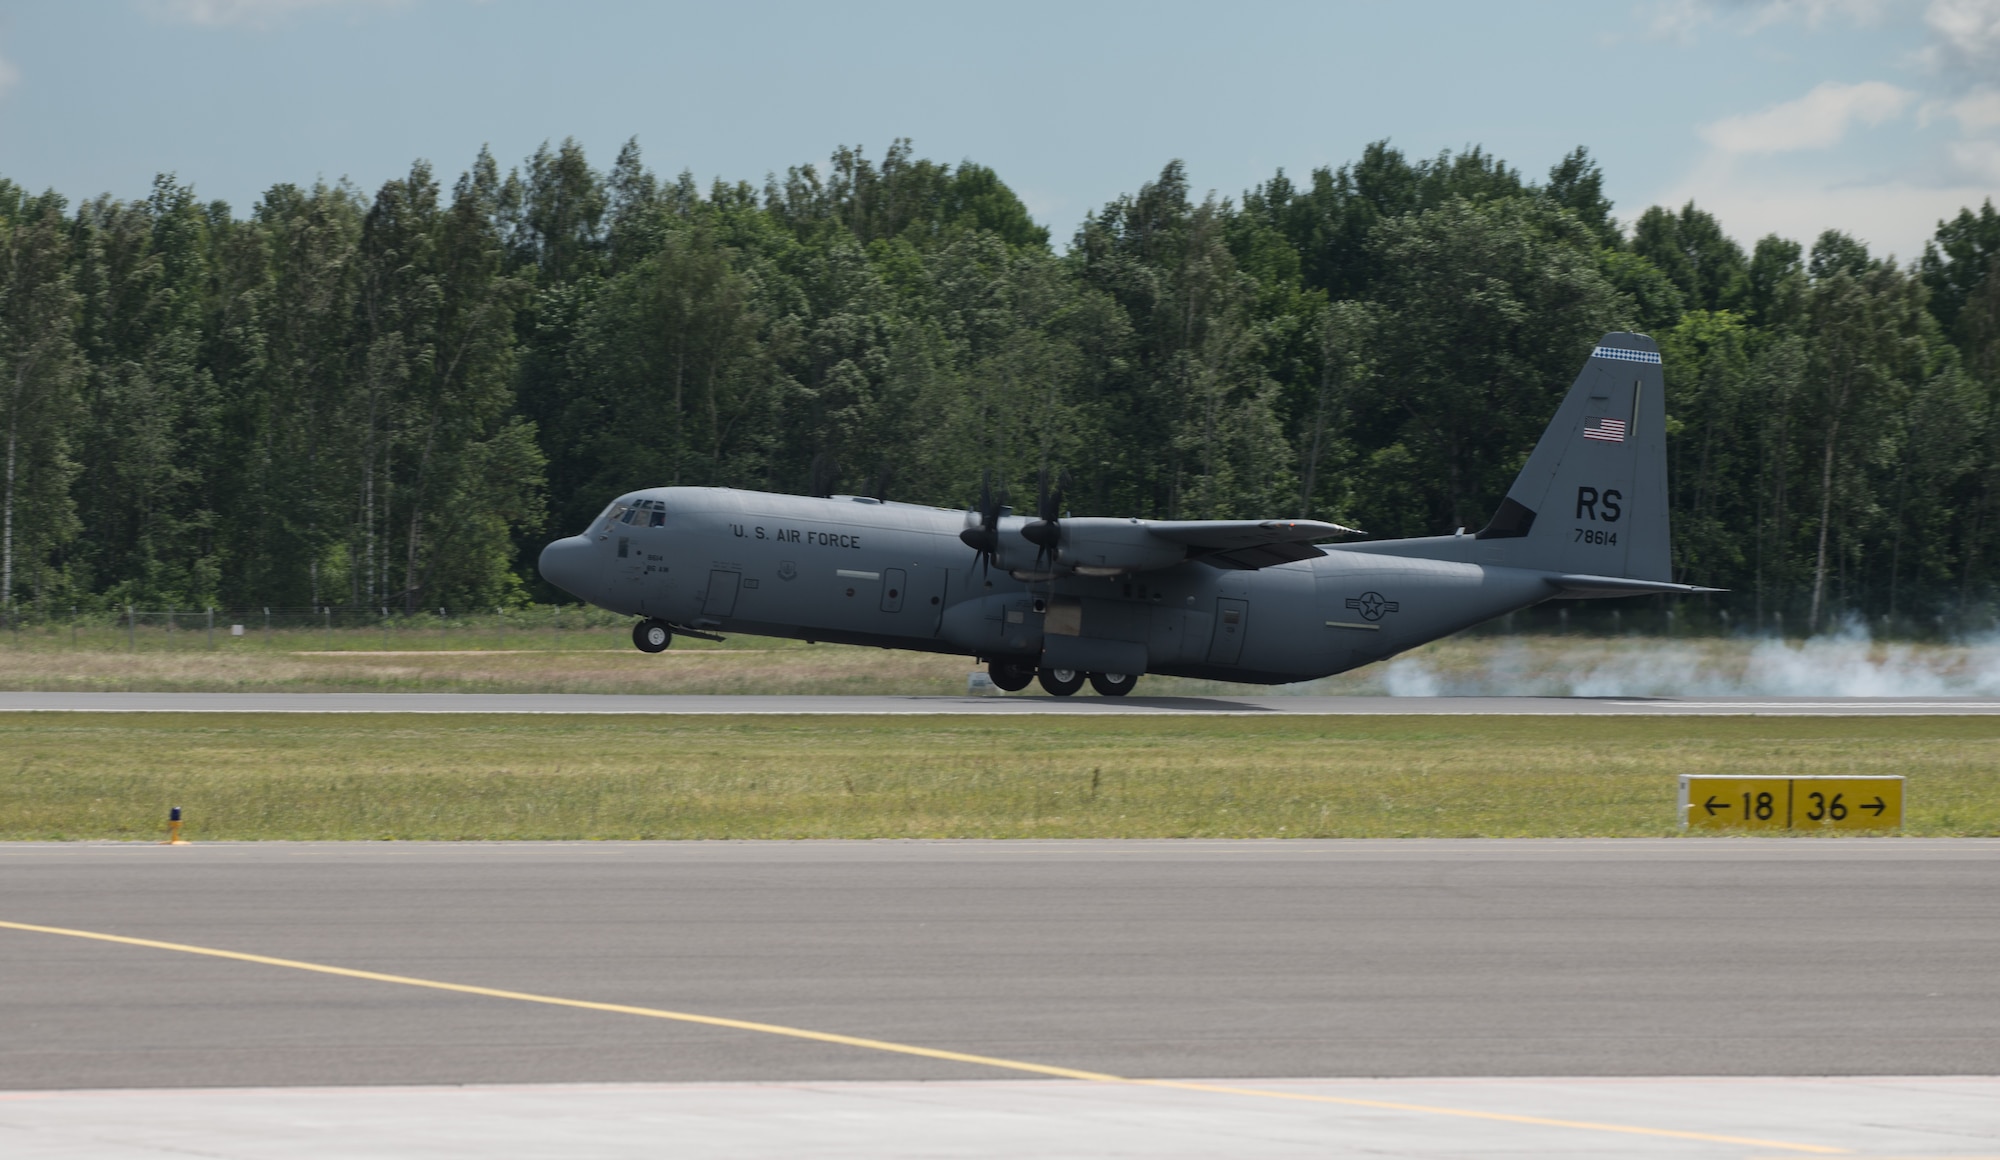 A C-130 J-model assigned to the 37th Airlift Squadron lands on Lielvarde Air Base, Latvia, June 17, 2014 in part of the exercise Saber Strike 2014. In total, three 37th AS airframes landed on Lielvarde, making them the first ever U.S. Air Force aircraft to land on the runway. The 37th AS aircraft brought approximately 92 Airmen from the 435th Contingency Response Group and equipment needed to build a bare base during the Air Force-specific training. (U.S. Air Force photo/Senior Airman Jonathan Stefanko)